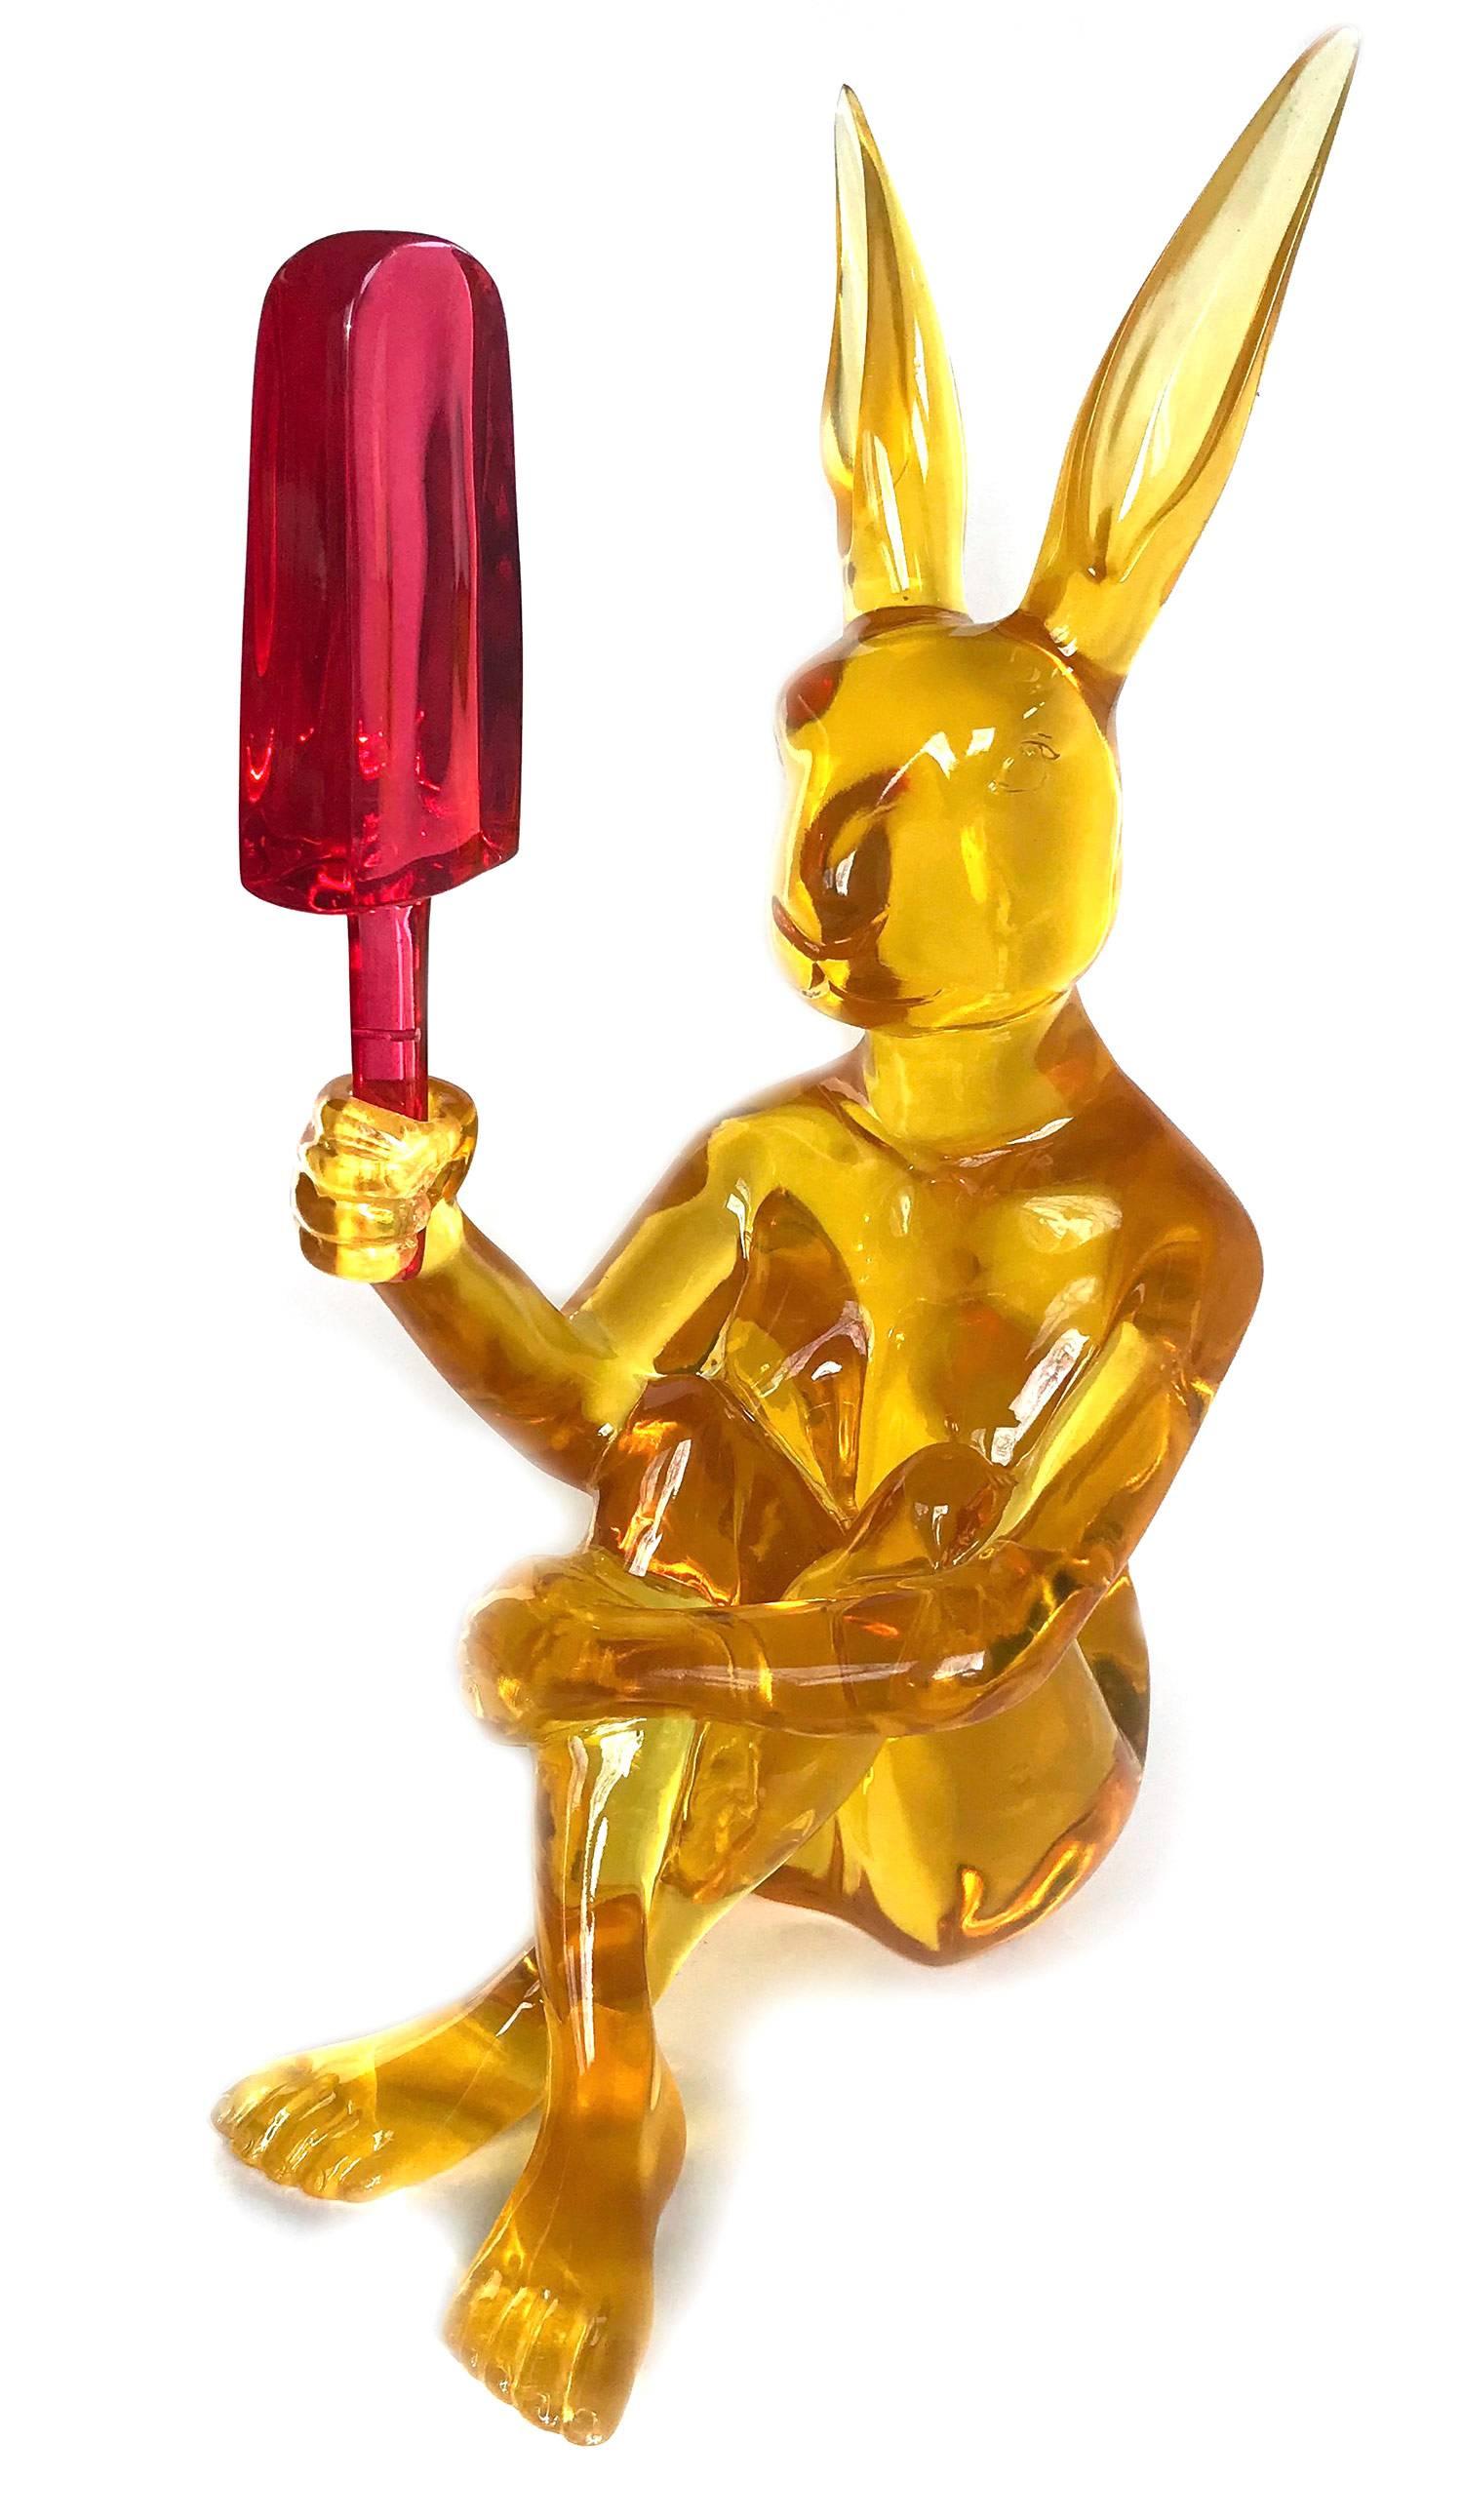 A whimsical yet very strong piece depicting the Rabbit from Gillie and Marc's iconic figures of the Dog/Bunny Human Hybrid, which has picked up much esteem across the globe. Here we find Rabbit holding an ice cream from the Lolly Collection, or